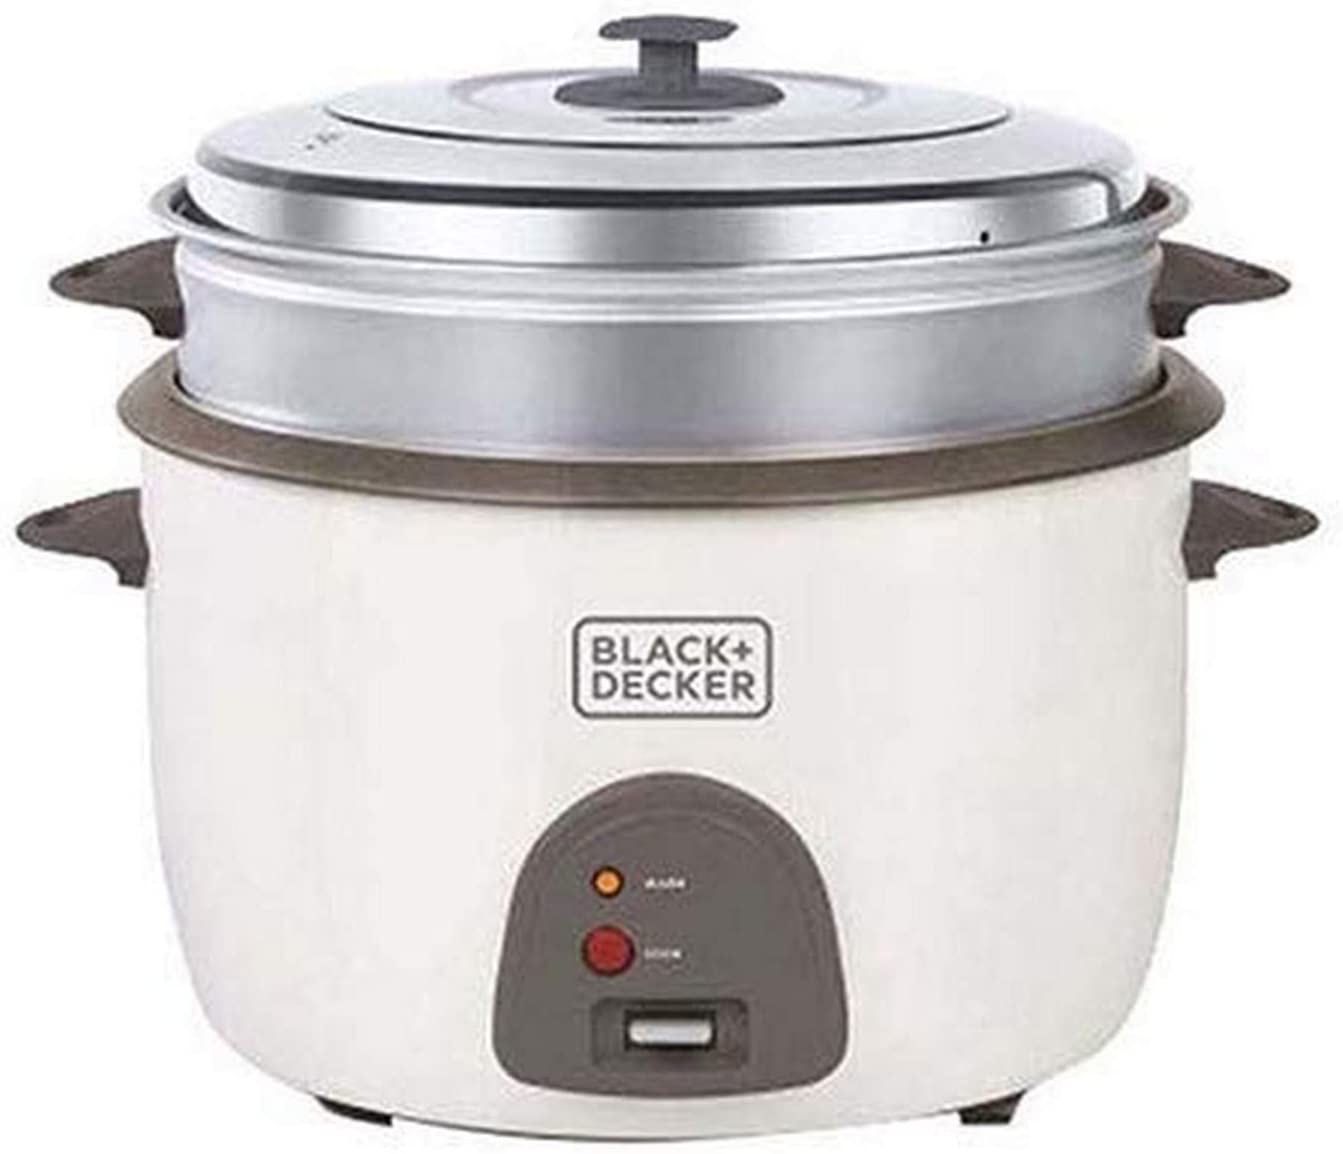 Frigidaire FD8010 5-Cup Rice Cooker 220 Volts Export Only - Not for US –  Portugalia Sales Inc